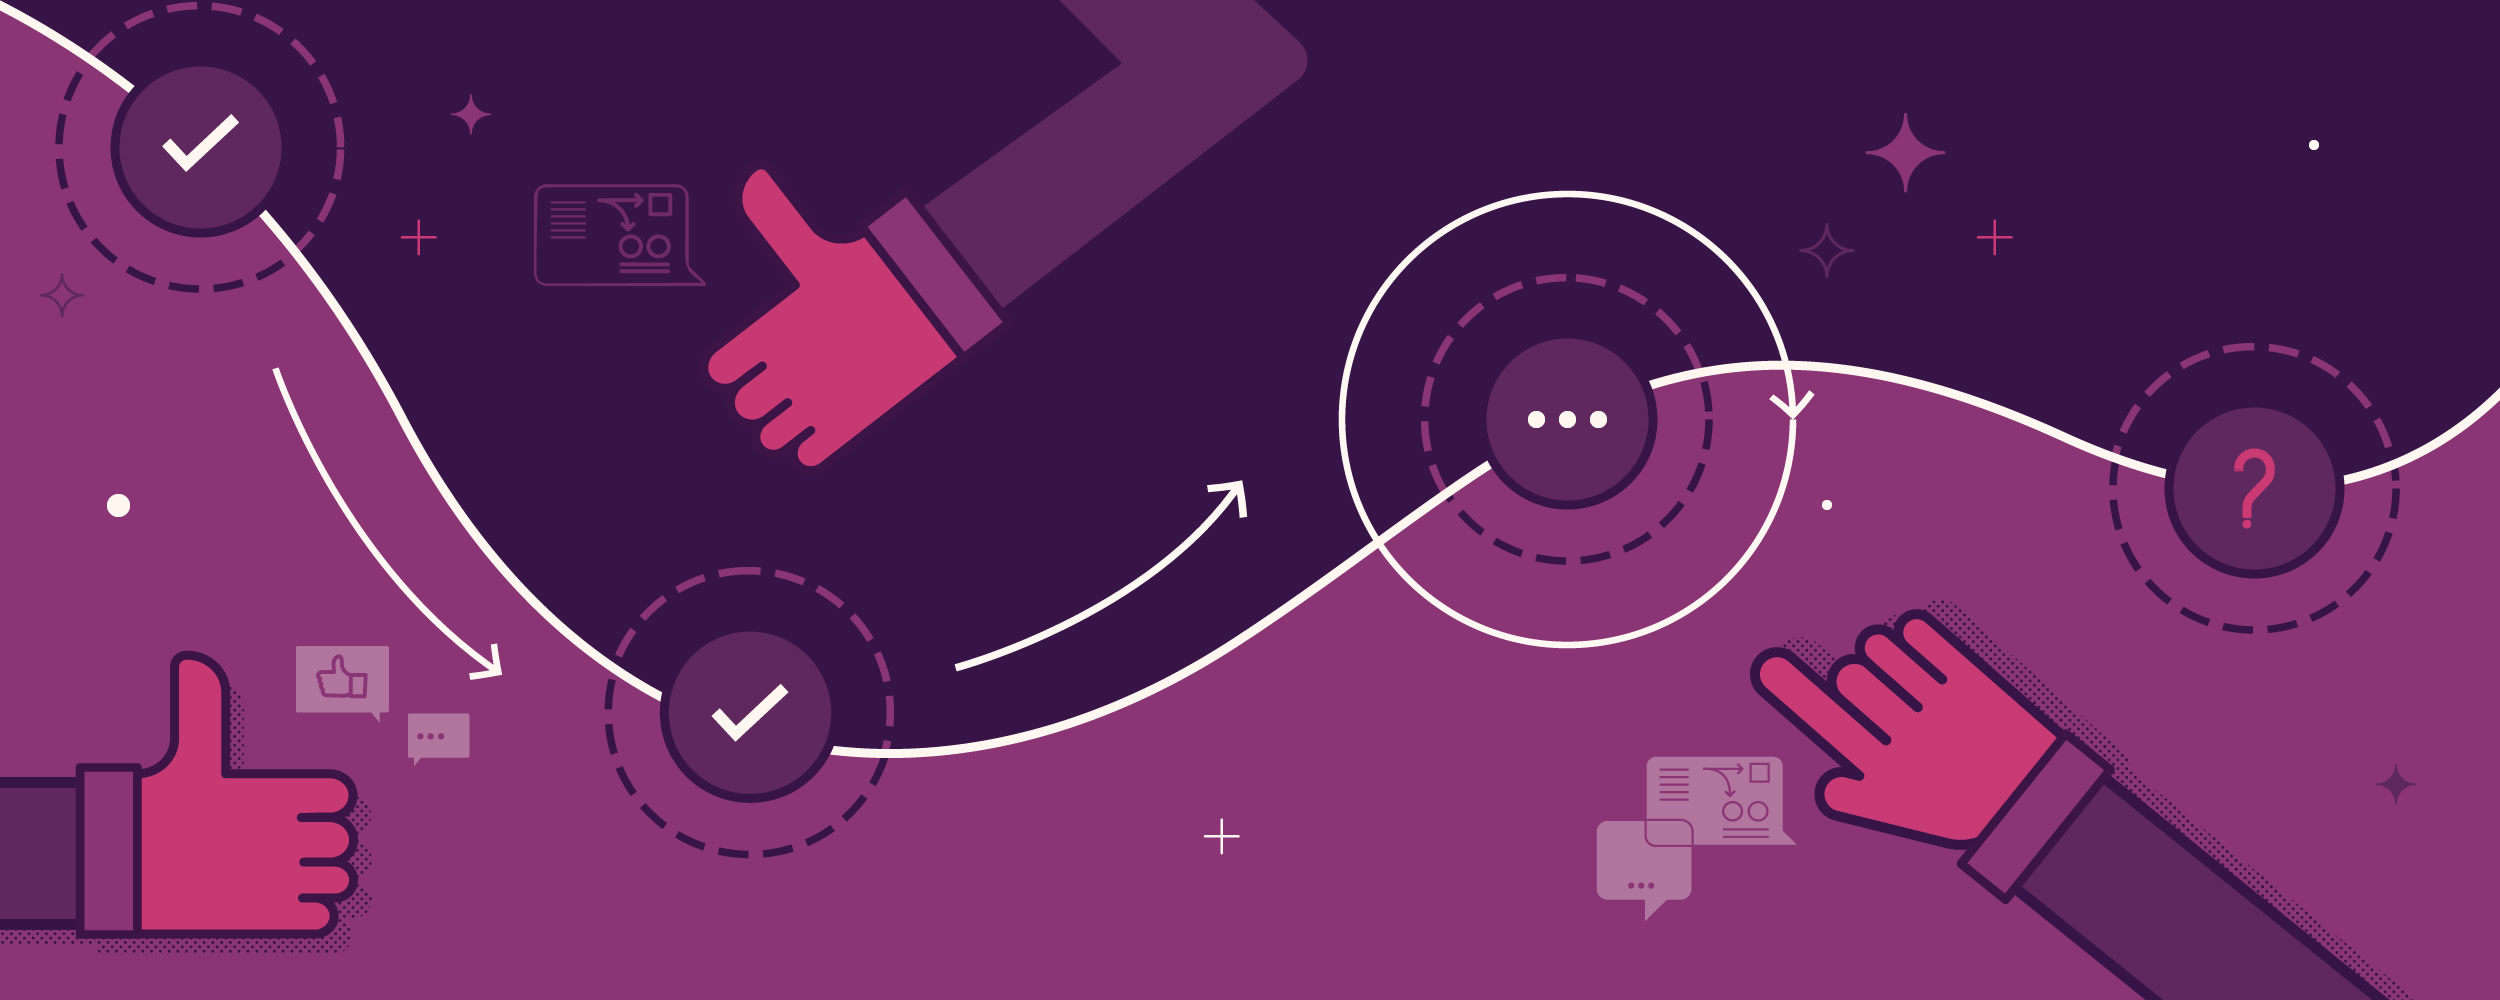 Illustration: On a dark purple and pink background, purple circles with white checkmarks and ellipses are connected by a white line and arrows indicating a cyclical pattern. Pink hands with purple sleeves are giving a thumbs up or pointing to each step showing Ally's approach to shortening the feedback cycle for software development.